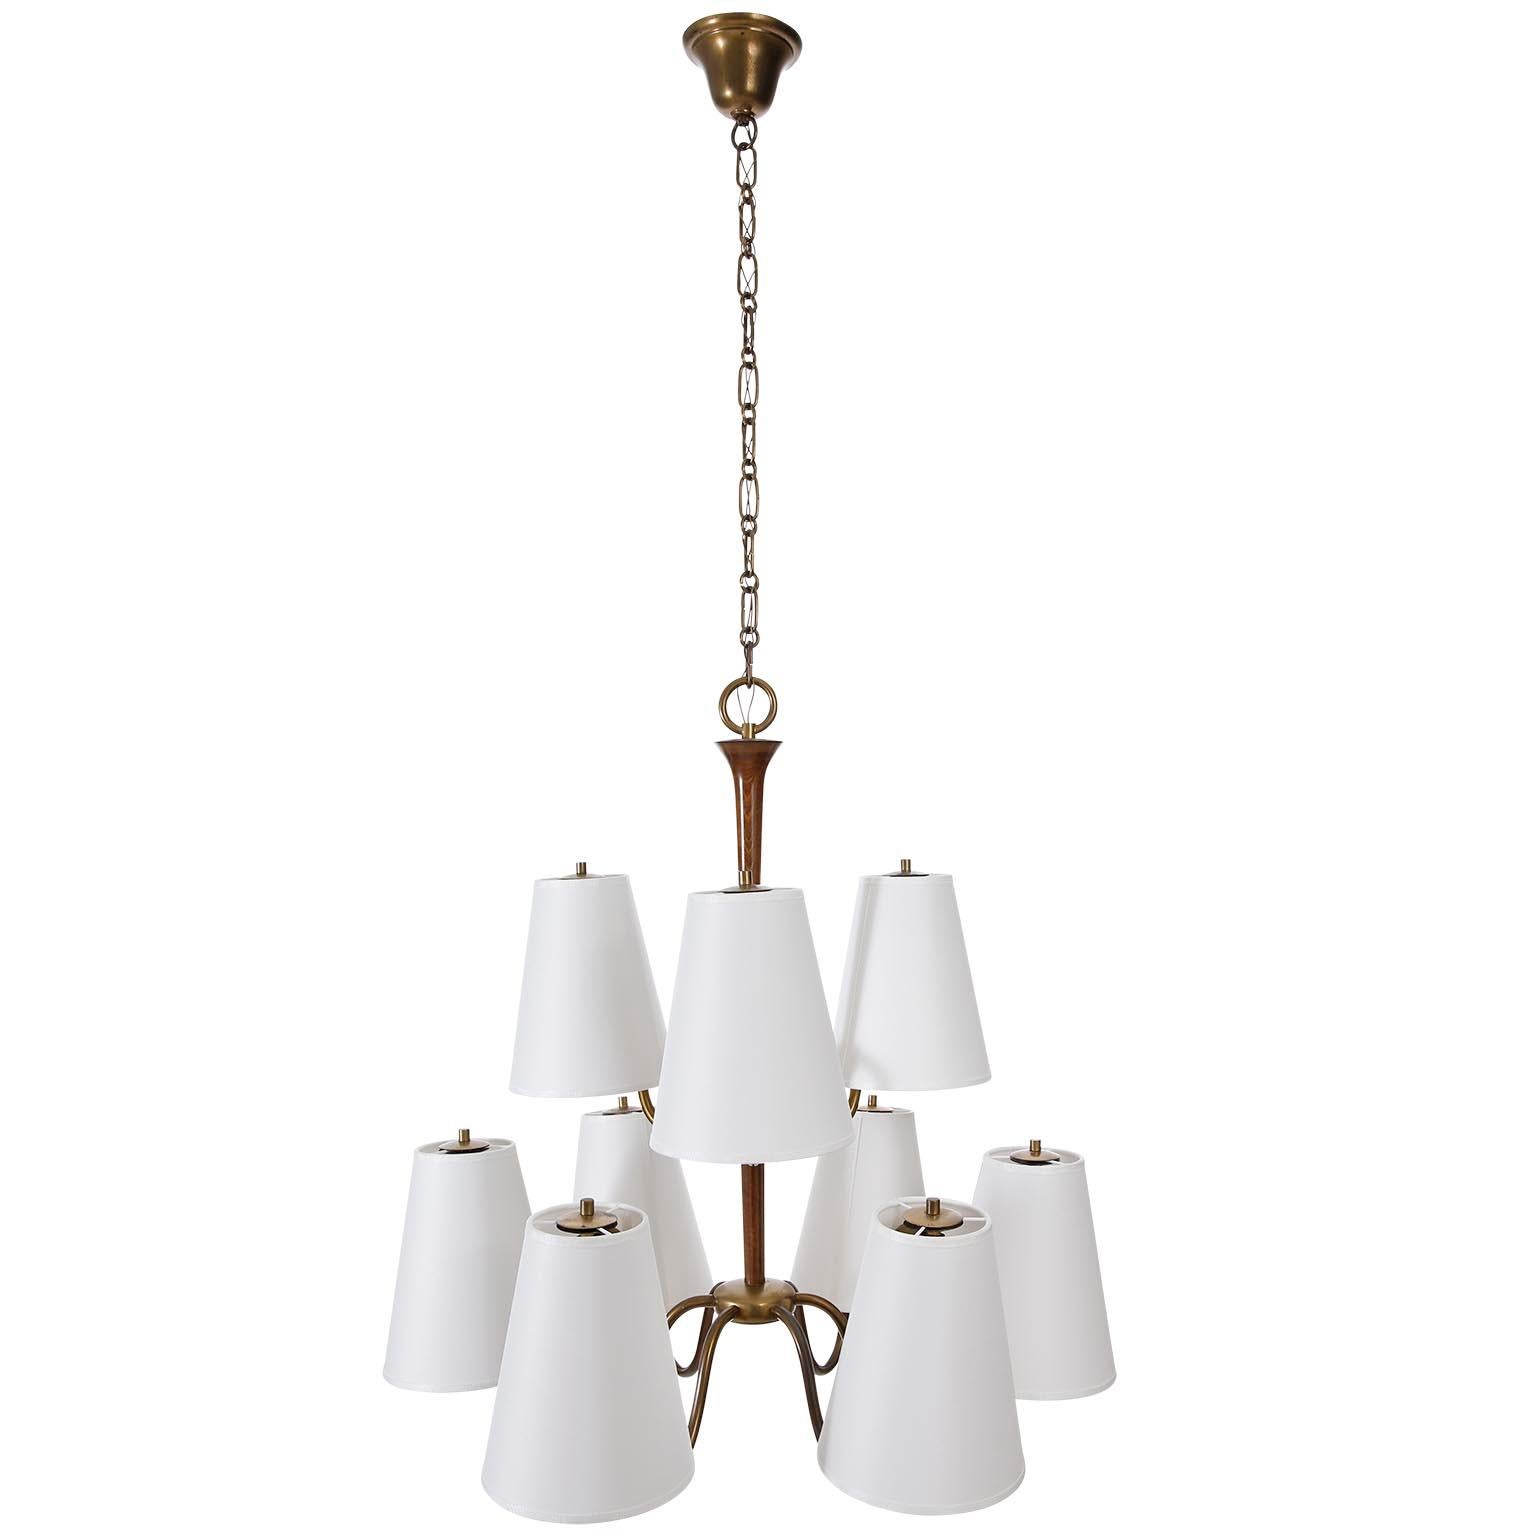 A 9-arm chandelier or pendant light attributed to Josef Frank, manufactured in 1930s.
It is made of wood and brass which got a wonderful patina during time.
The white lamp shades have been renewed on base of the original ones.
There are nine